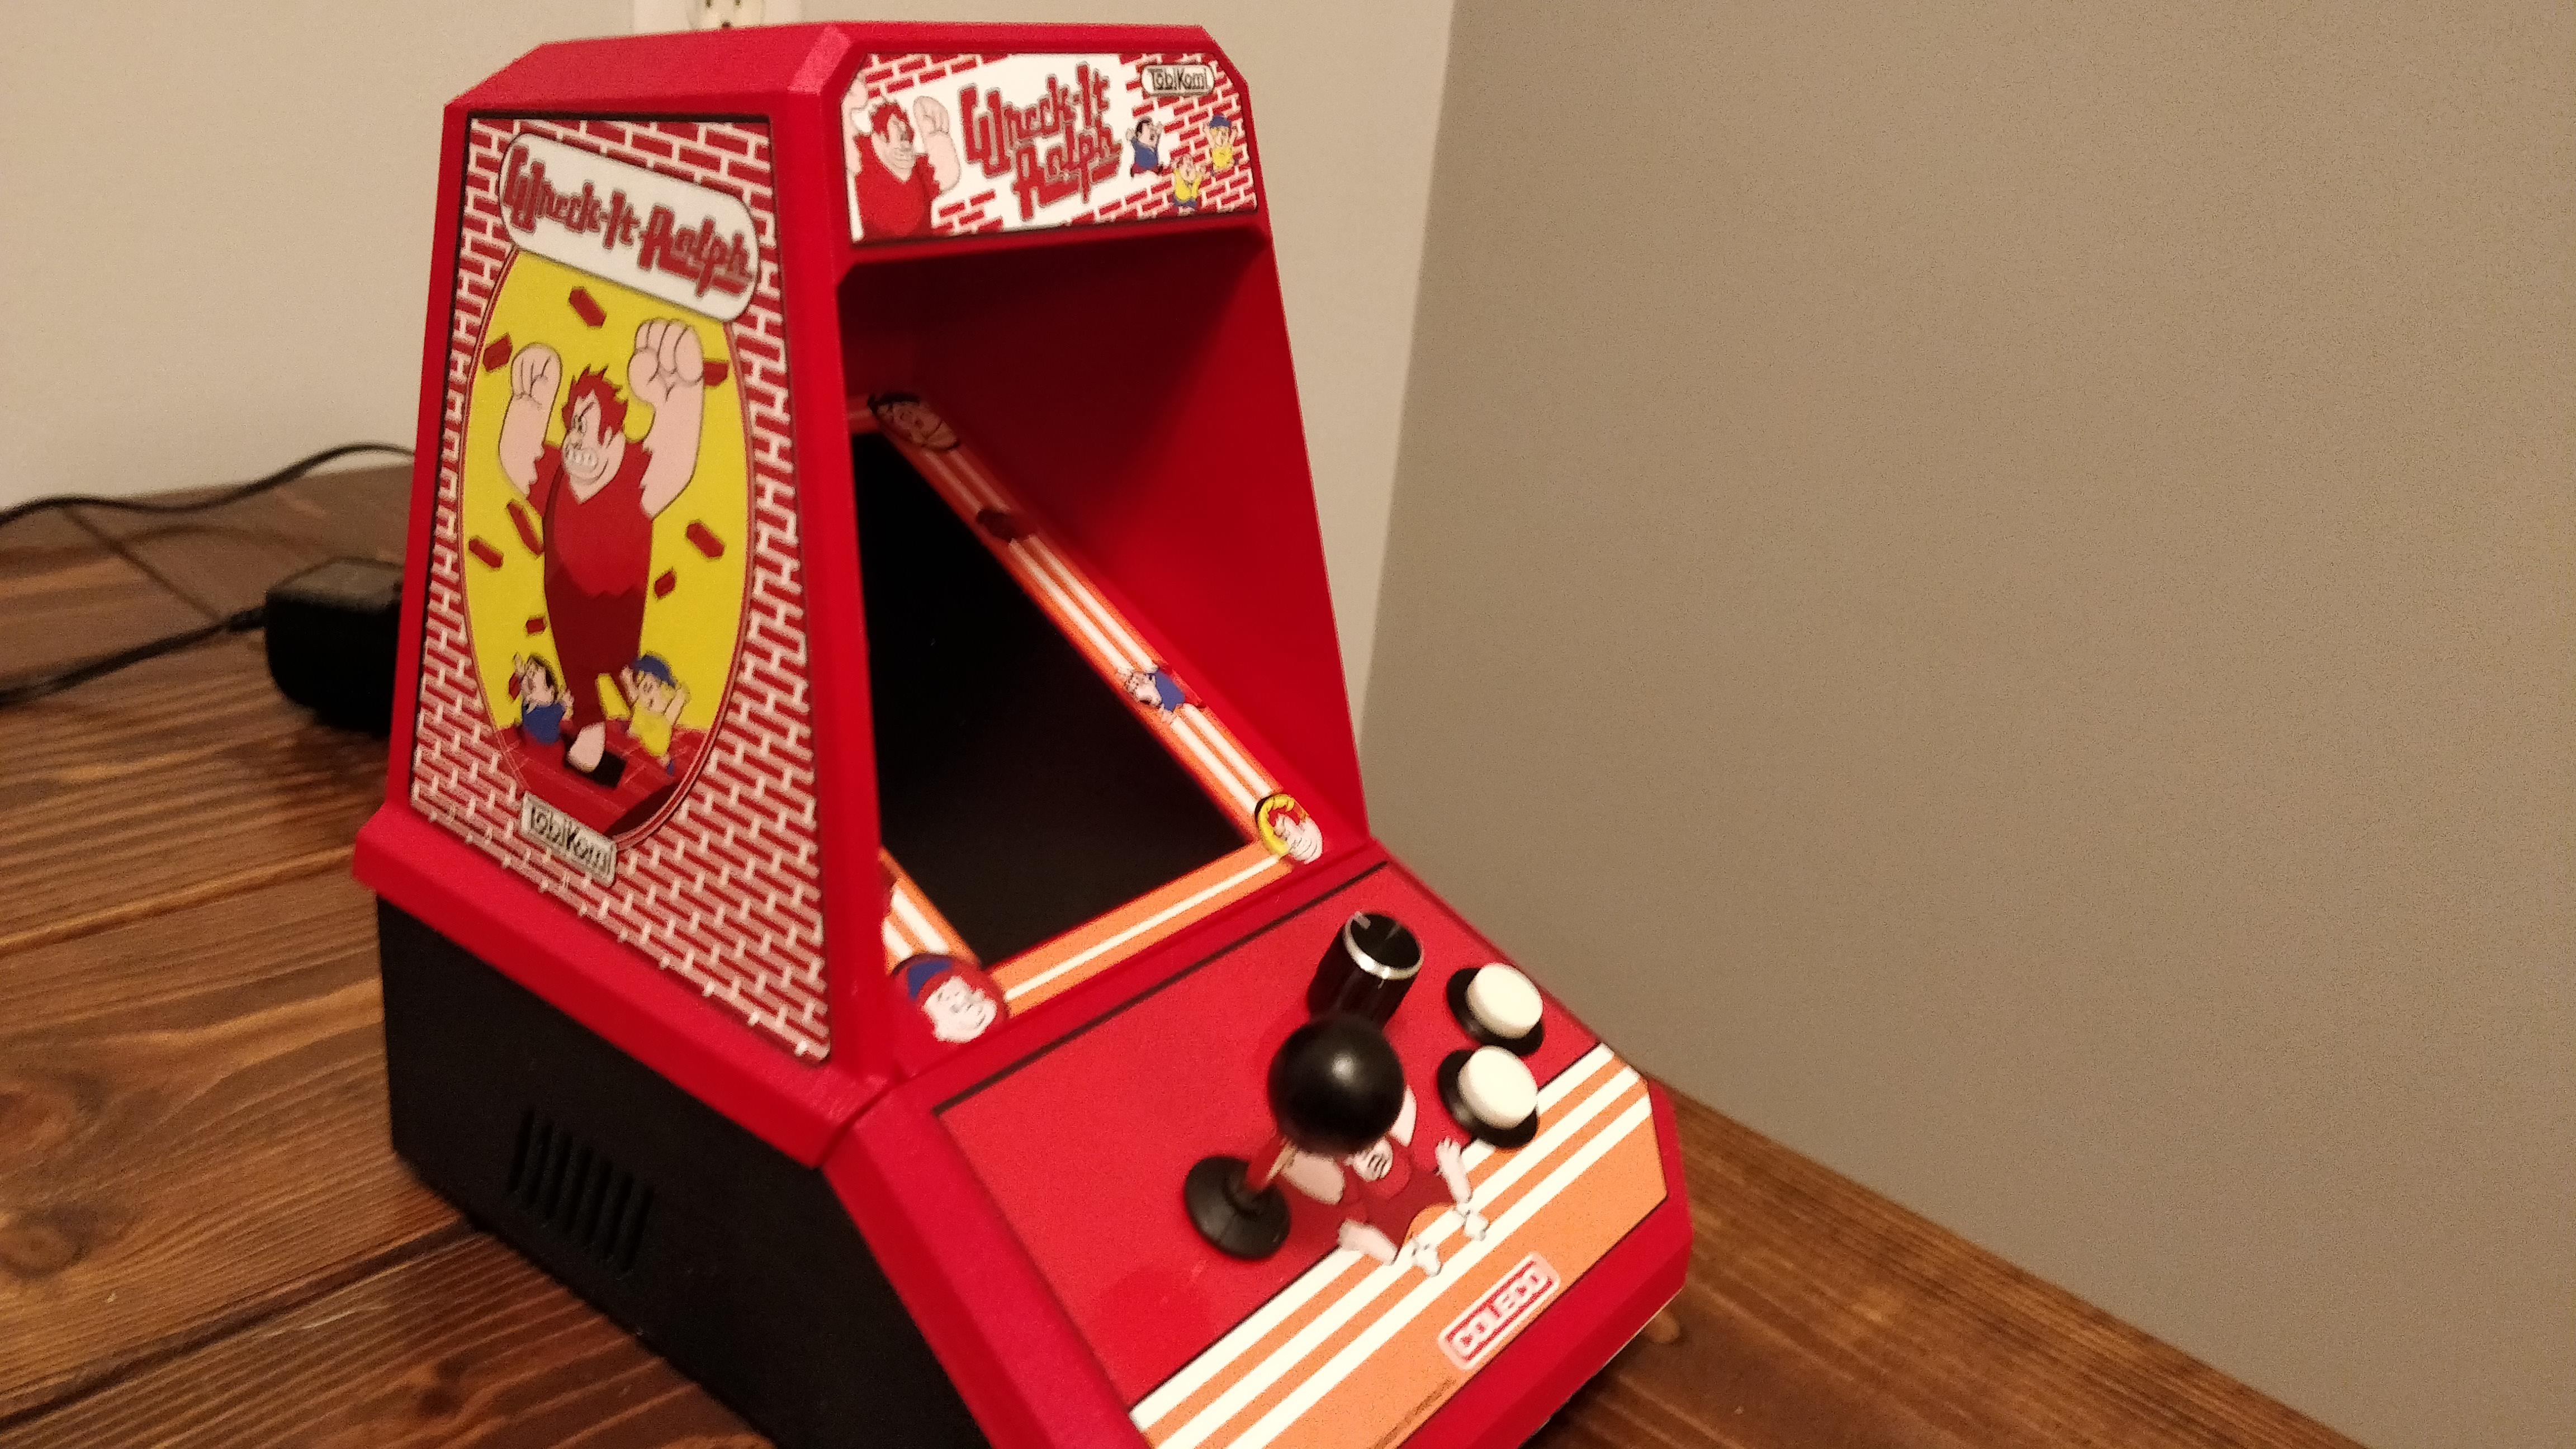 Full view of the Coleco Wreck It Ralph